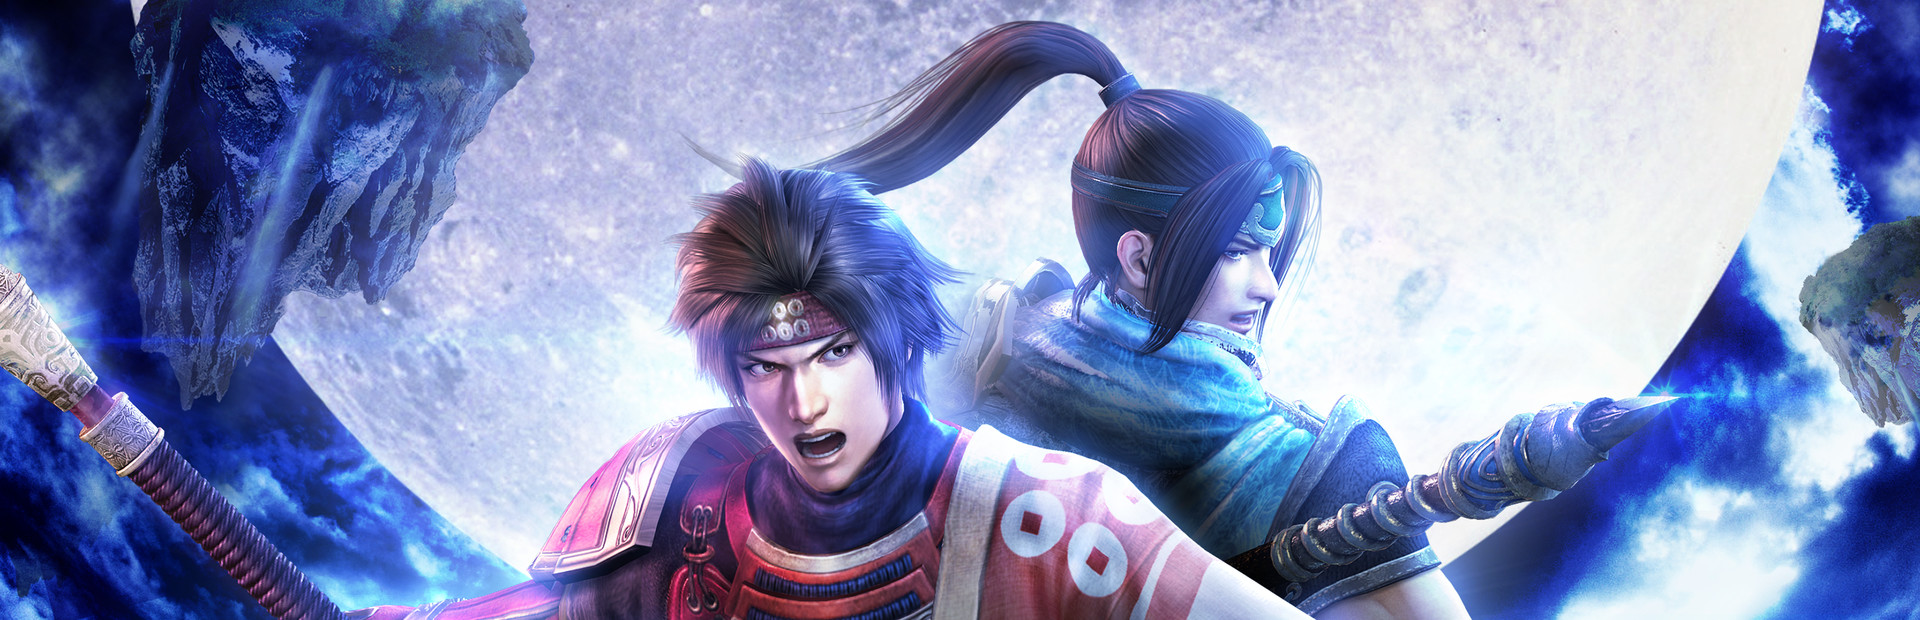 WARRIORS OROCHI 3 Ultimate Definitive Edition cover image